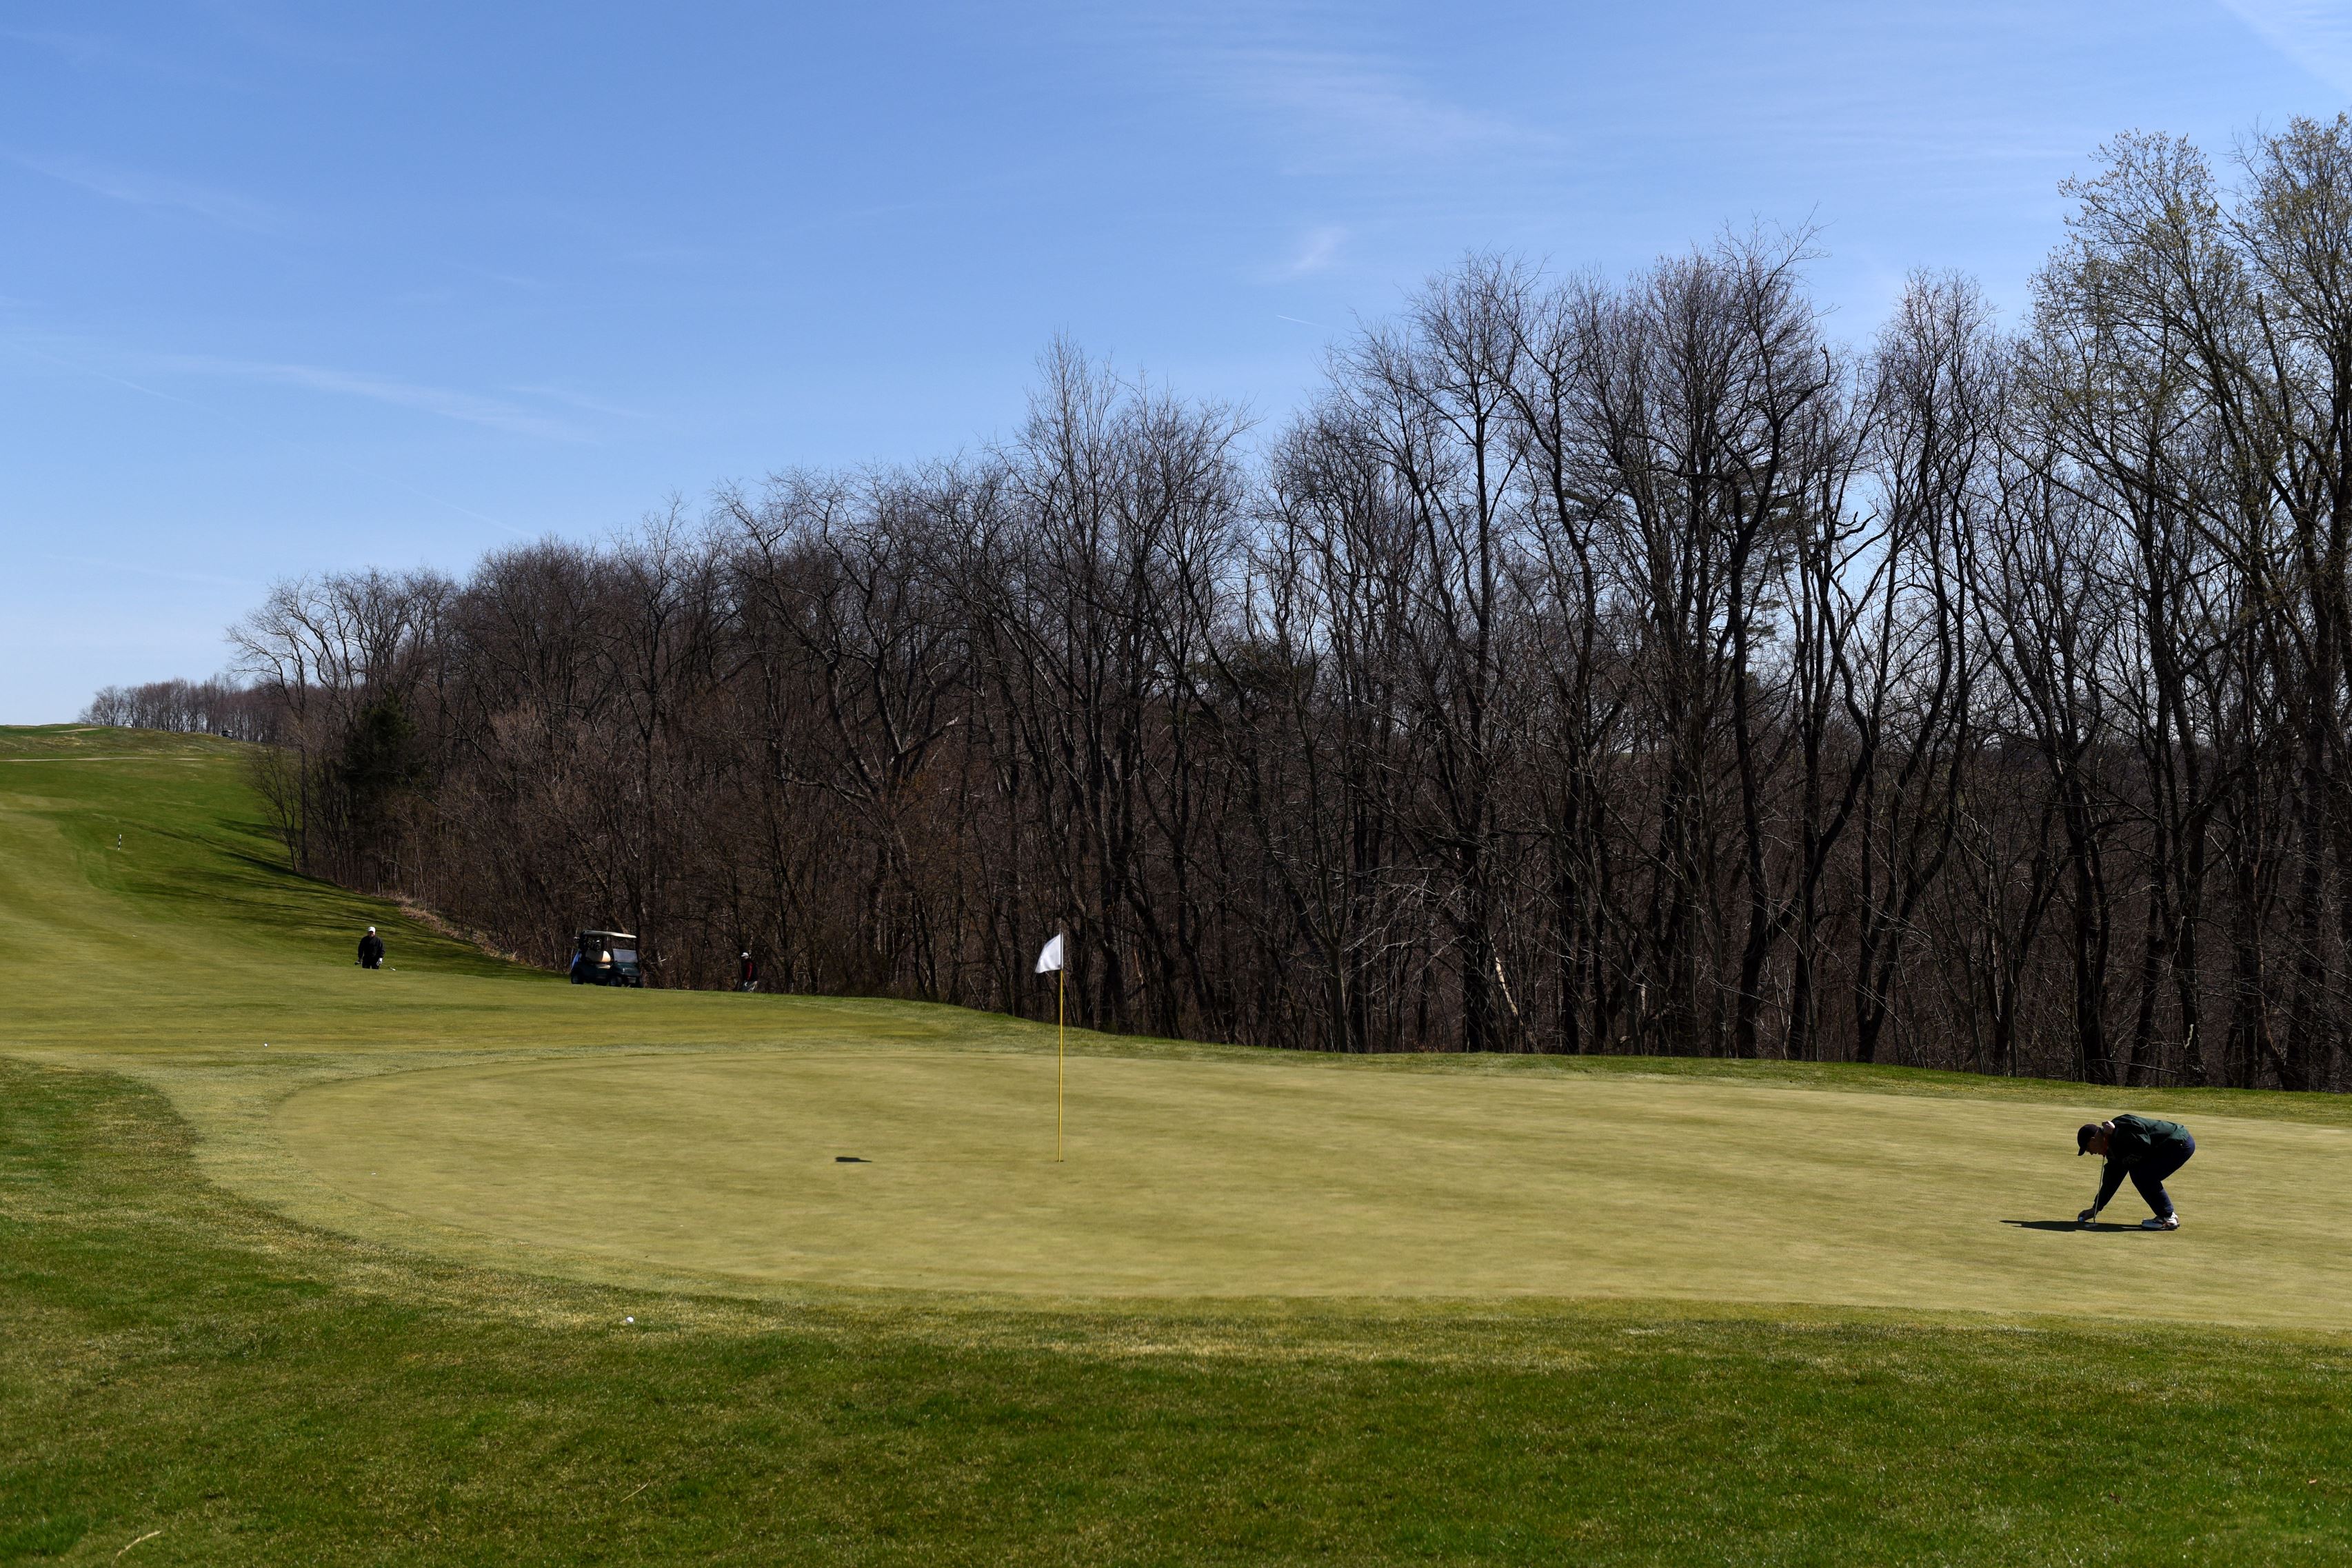 Is golf's popularity declining in Pittsburgh? | Pittsburgh Post-Gazette